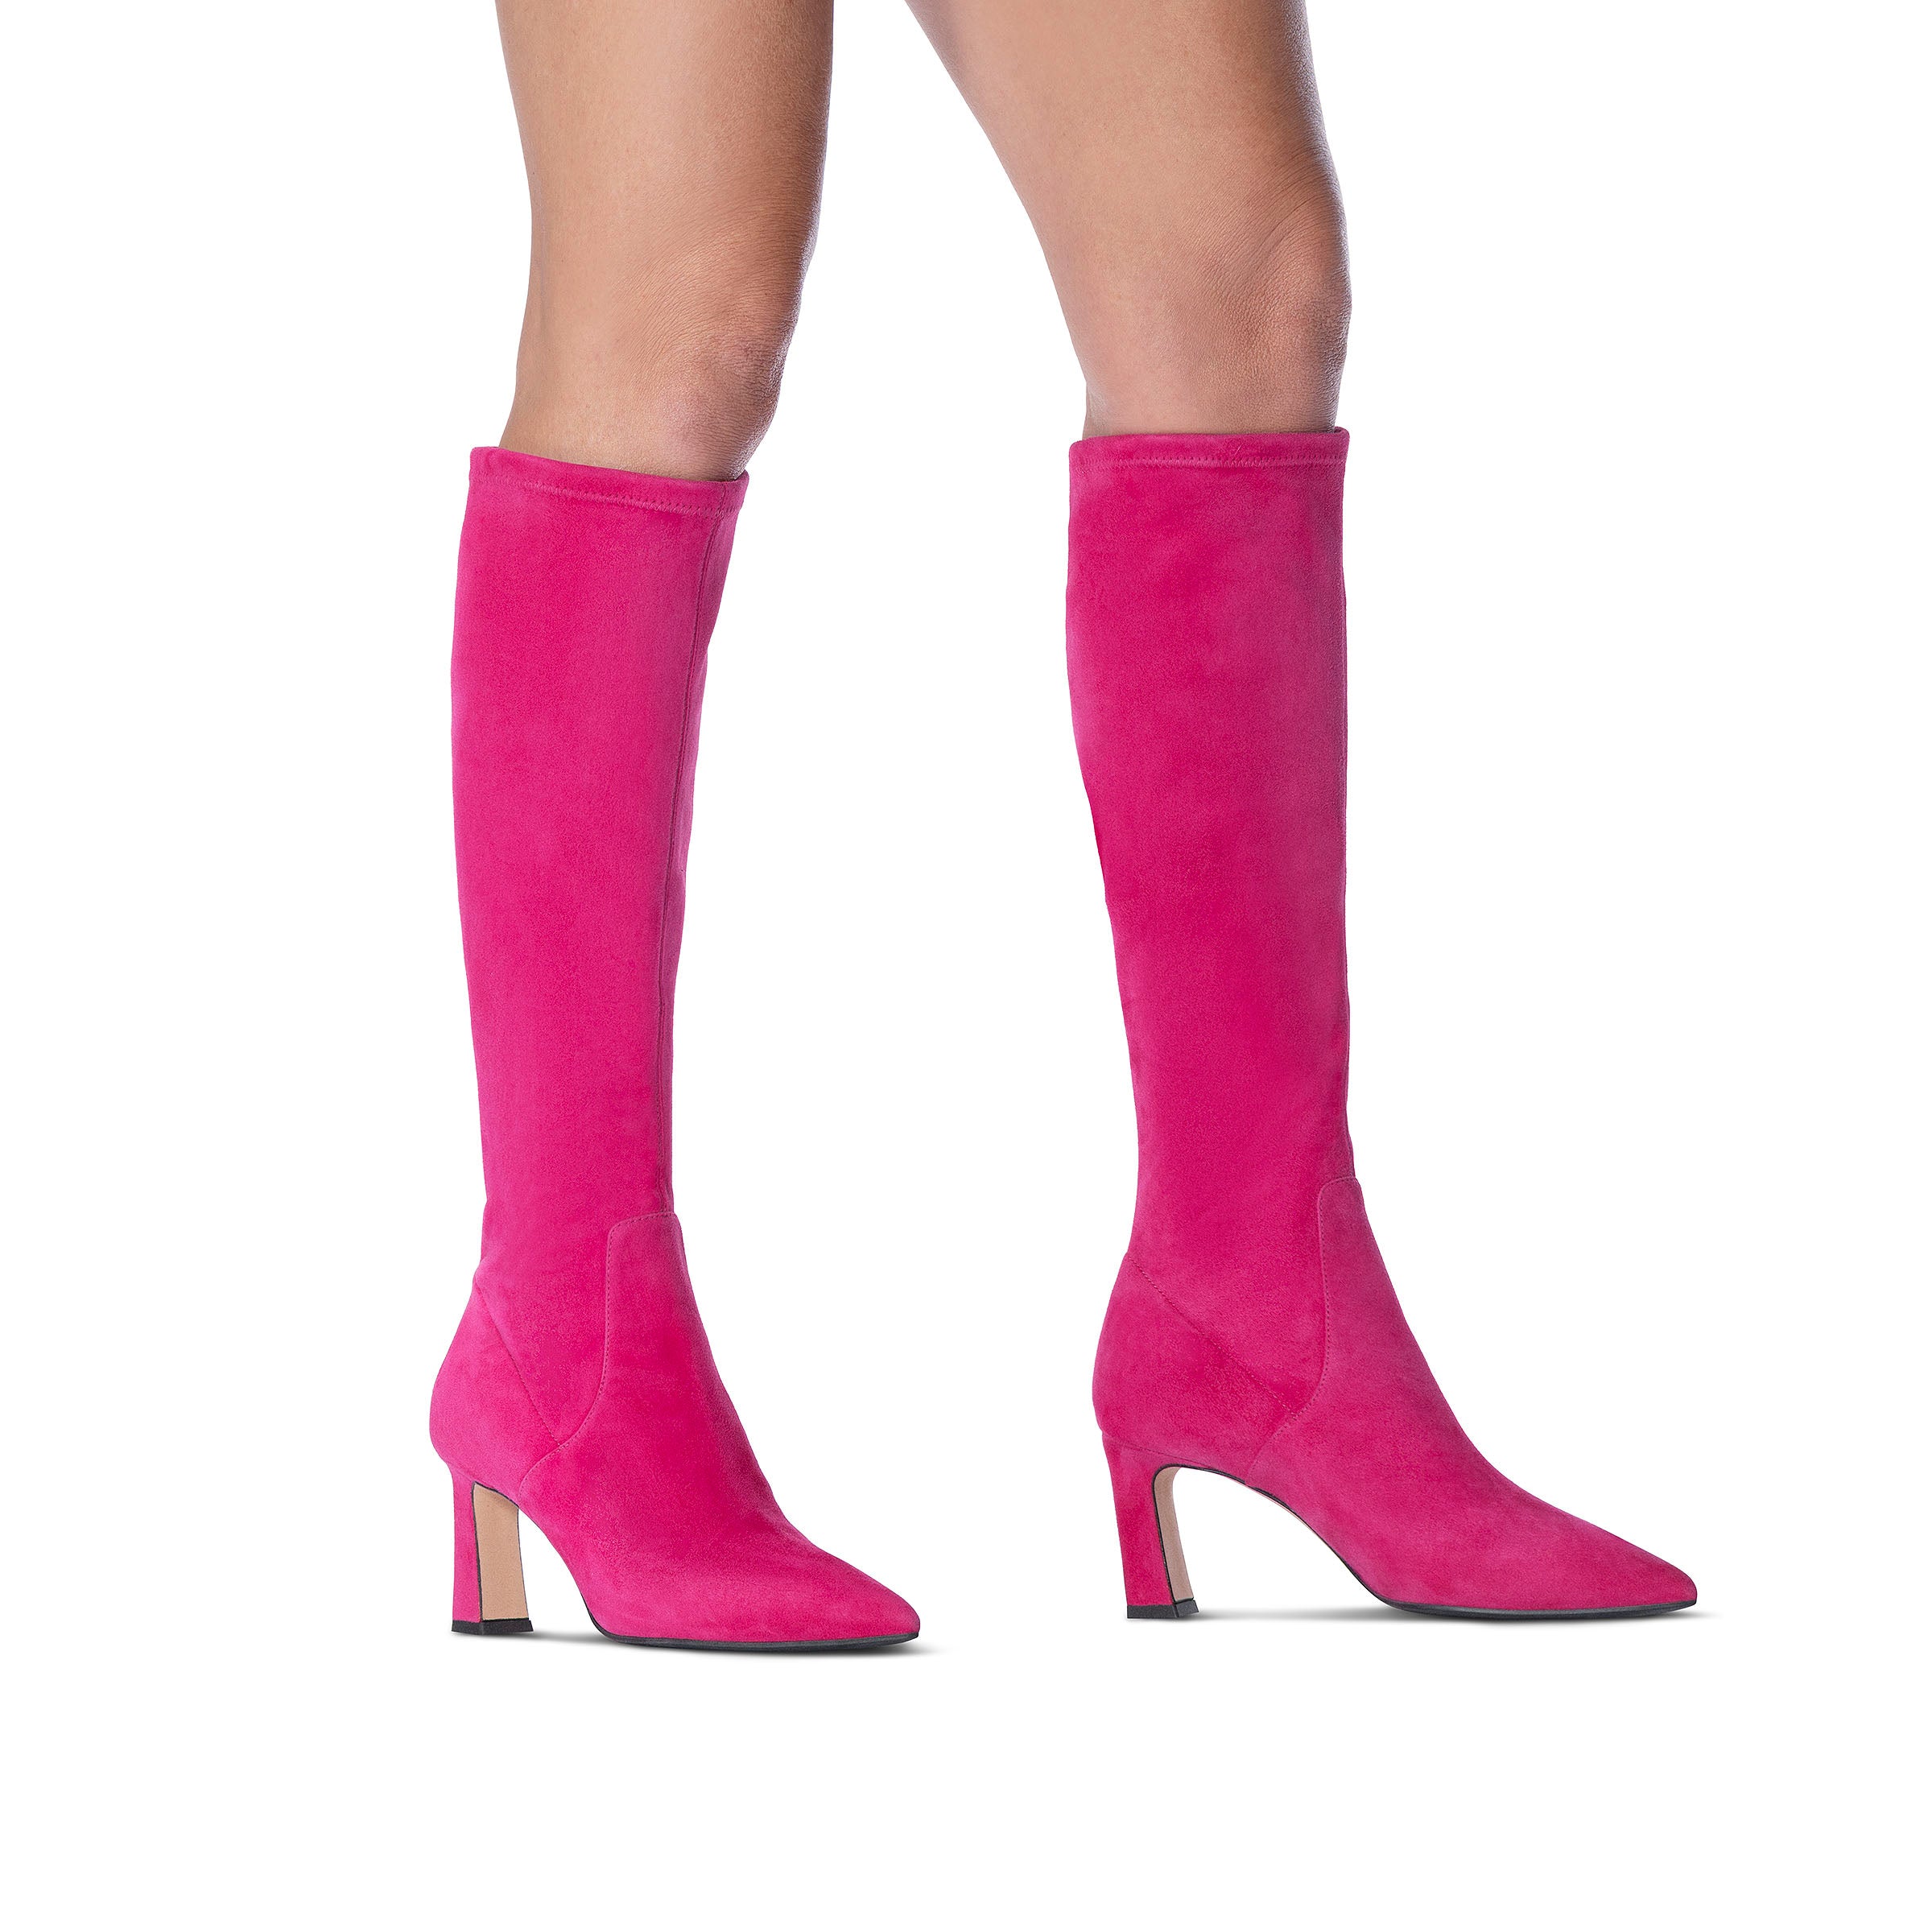 Lola 75 Stretch High Boot / Bright Pink Suede